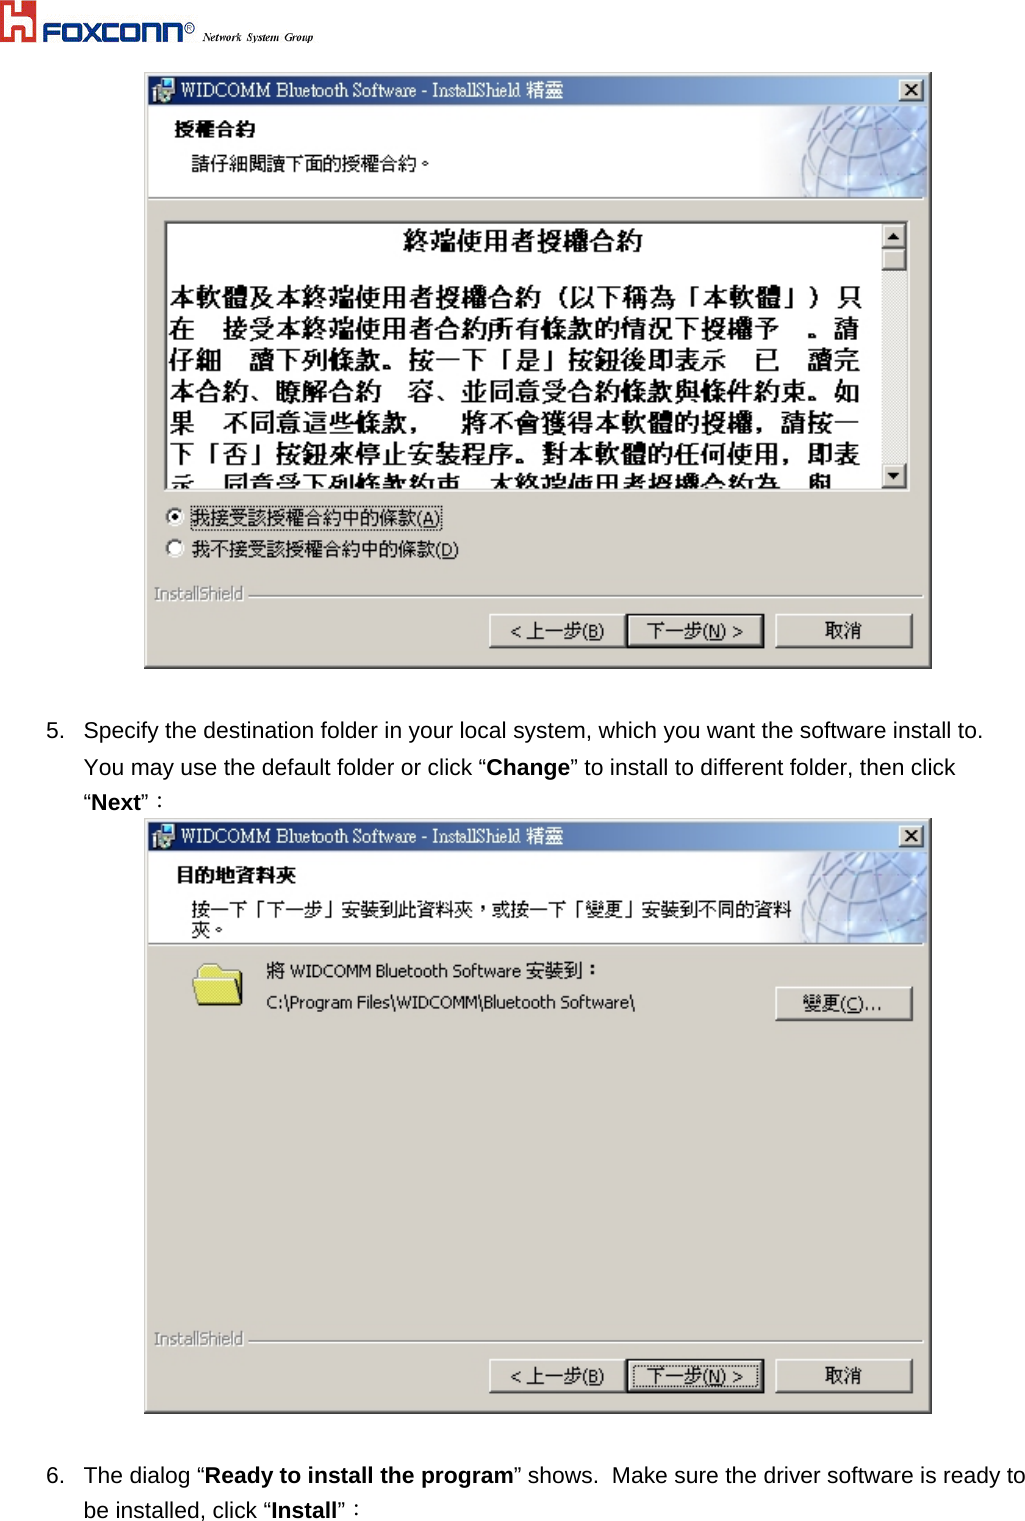    5.  Specify the destination folder in your local system, which you want the software install to.  You may use the default folder or click “Change” to install to different folder, then click “Next”：   6.  The dialog “Ready to install the program” shows.  Make sure the driver software is ready to be installed, click “Install”： 